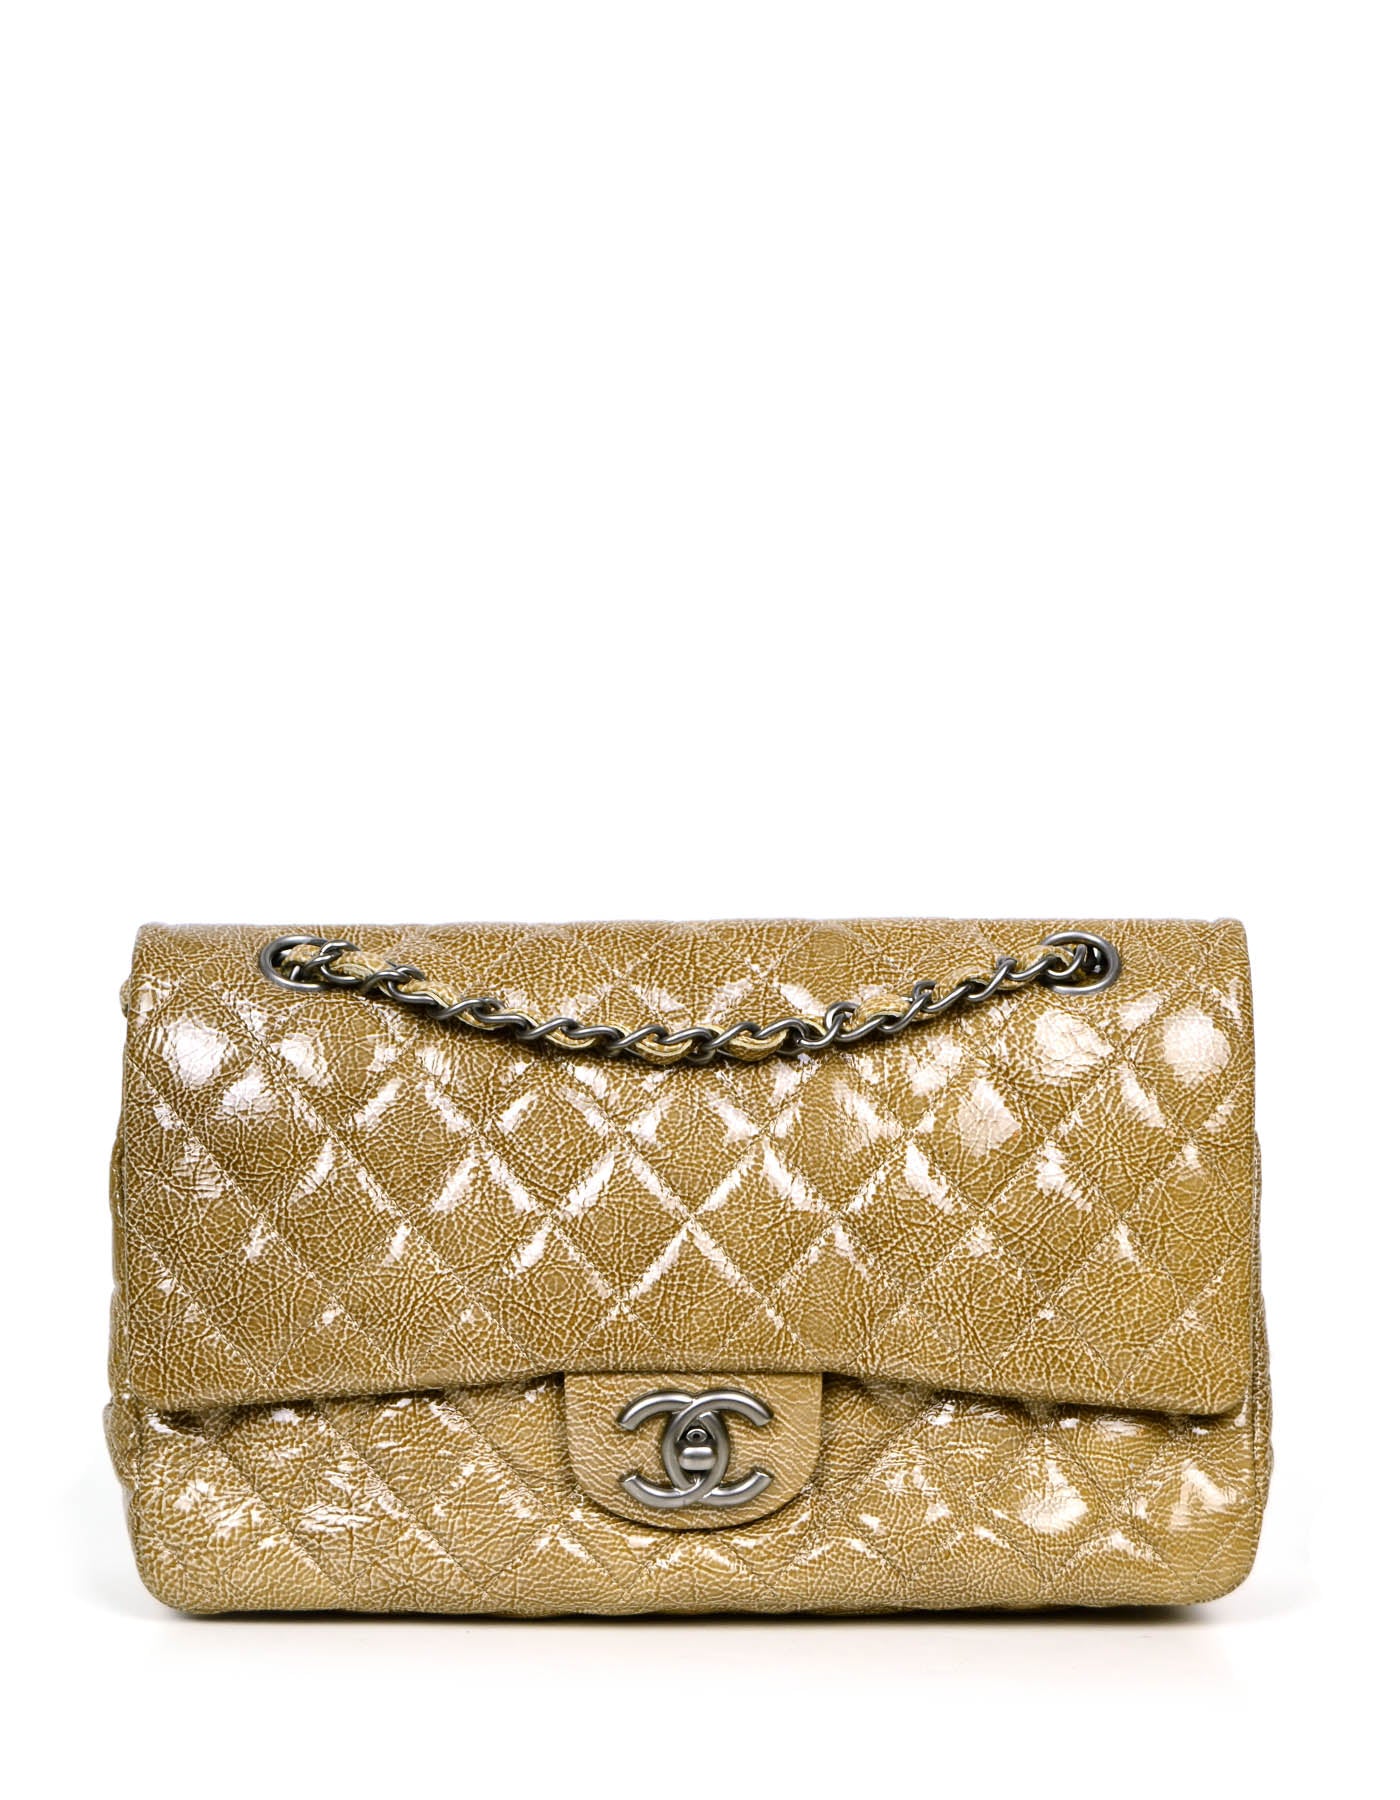 Chanel Beige Crumpled Patent Quilted Double Flap 10 Classic Bag